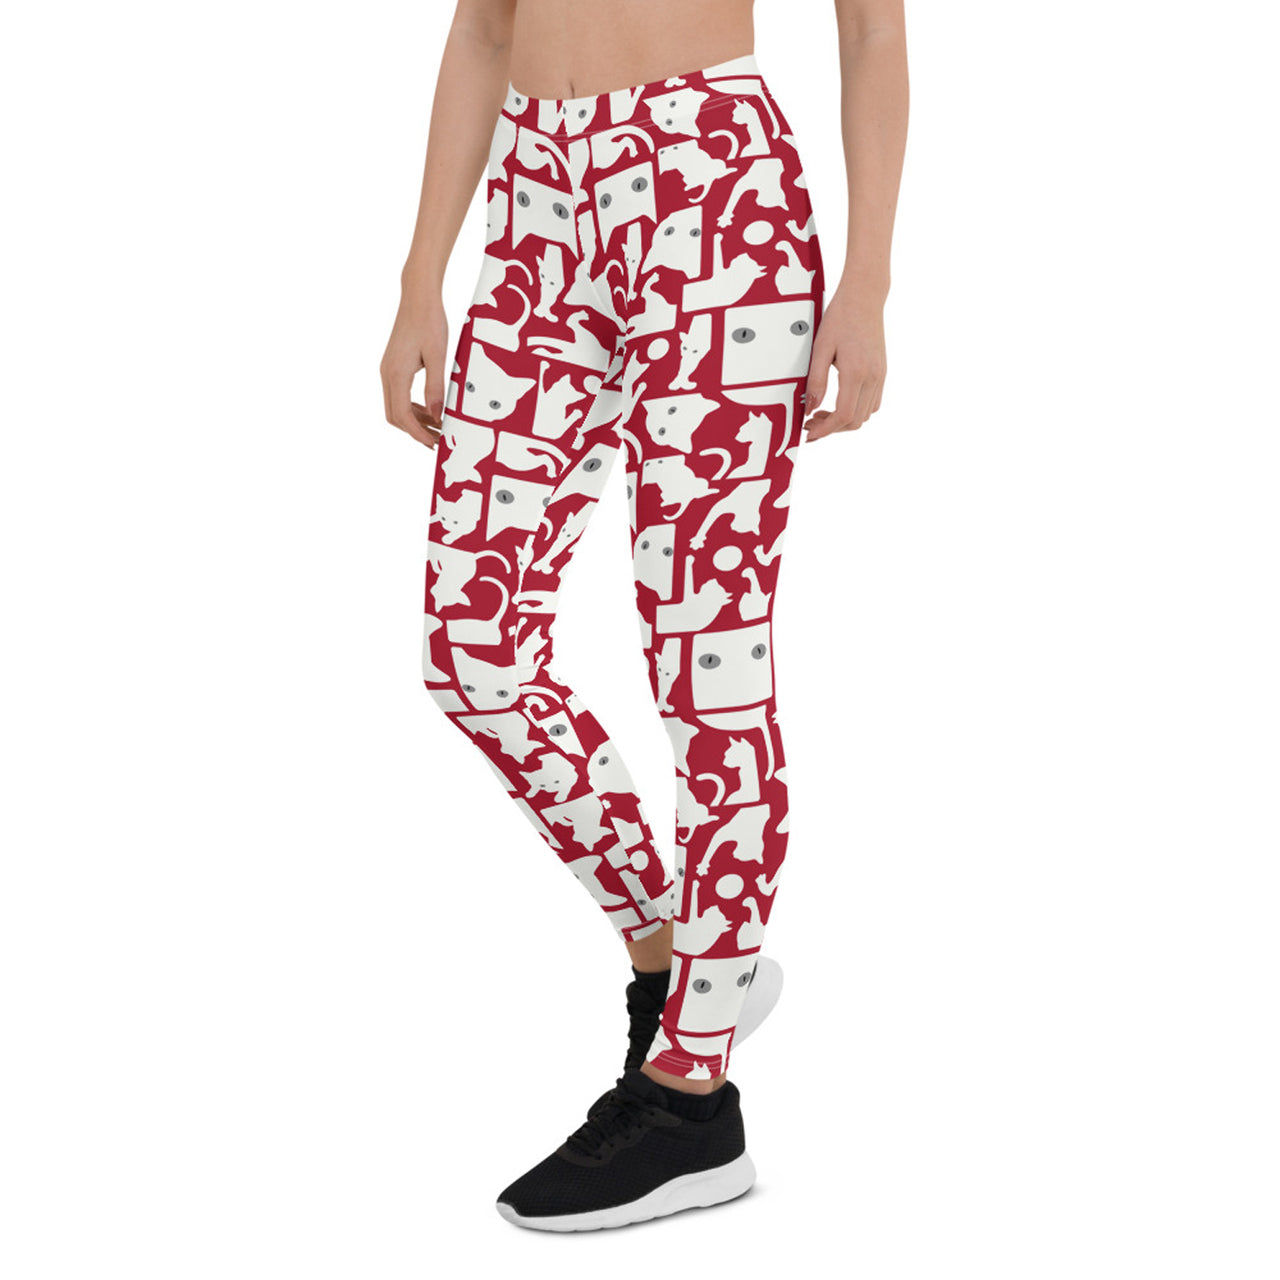 red leggings with white cats on them